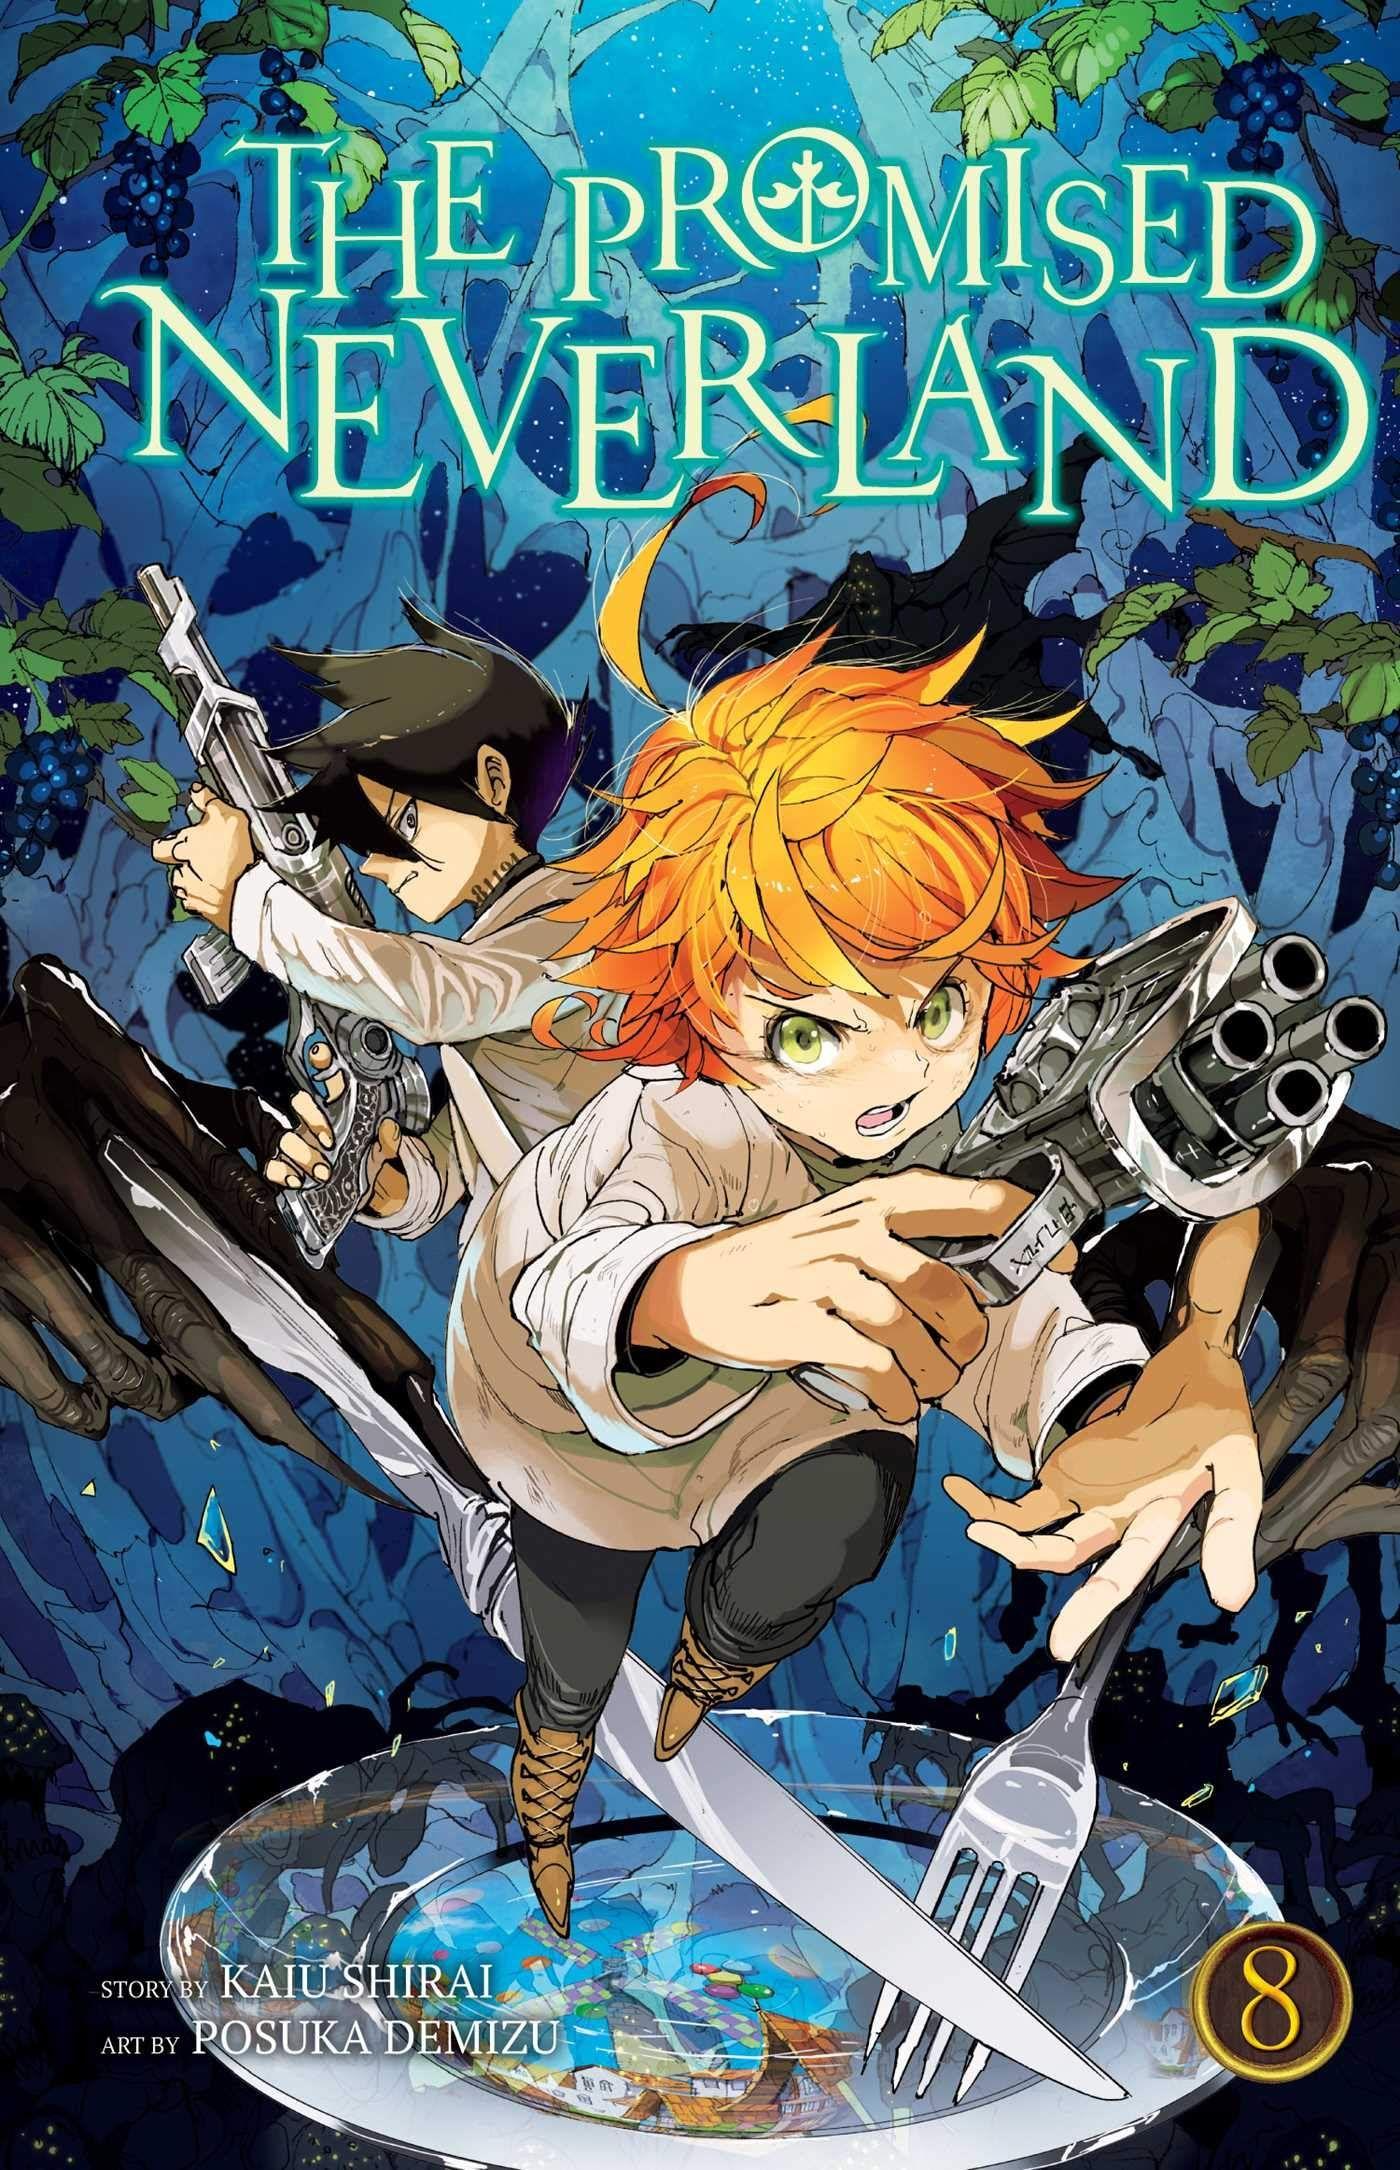 The Promised Neverland Wallpapers | HD Background Images | Photos